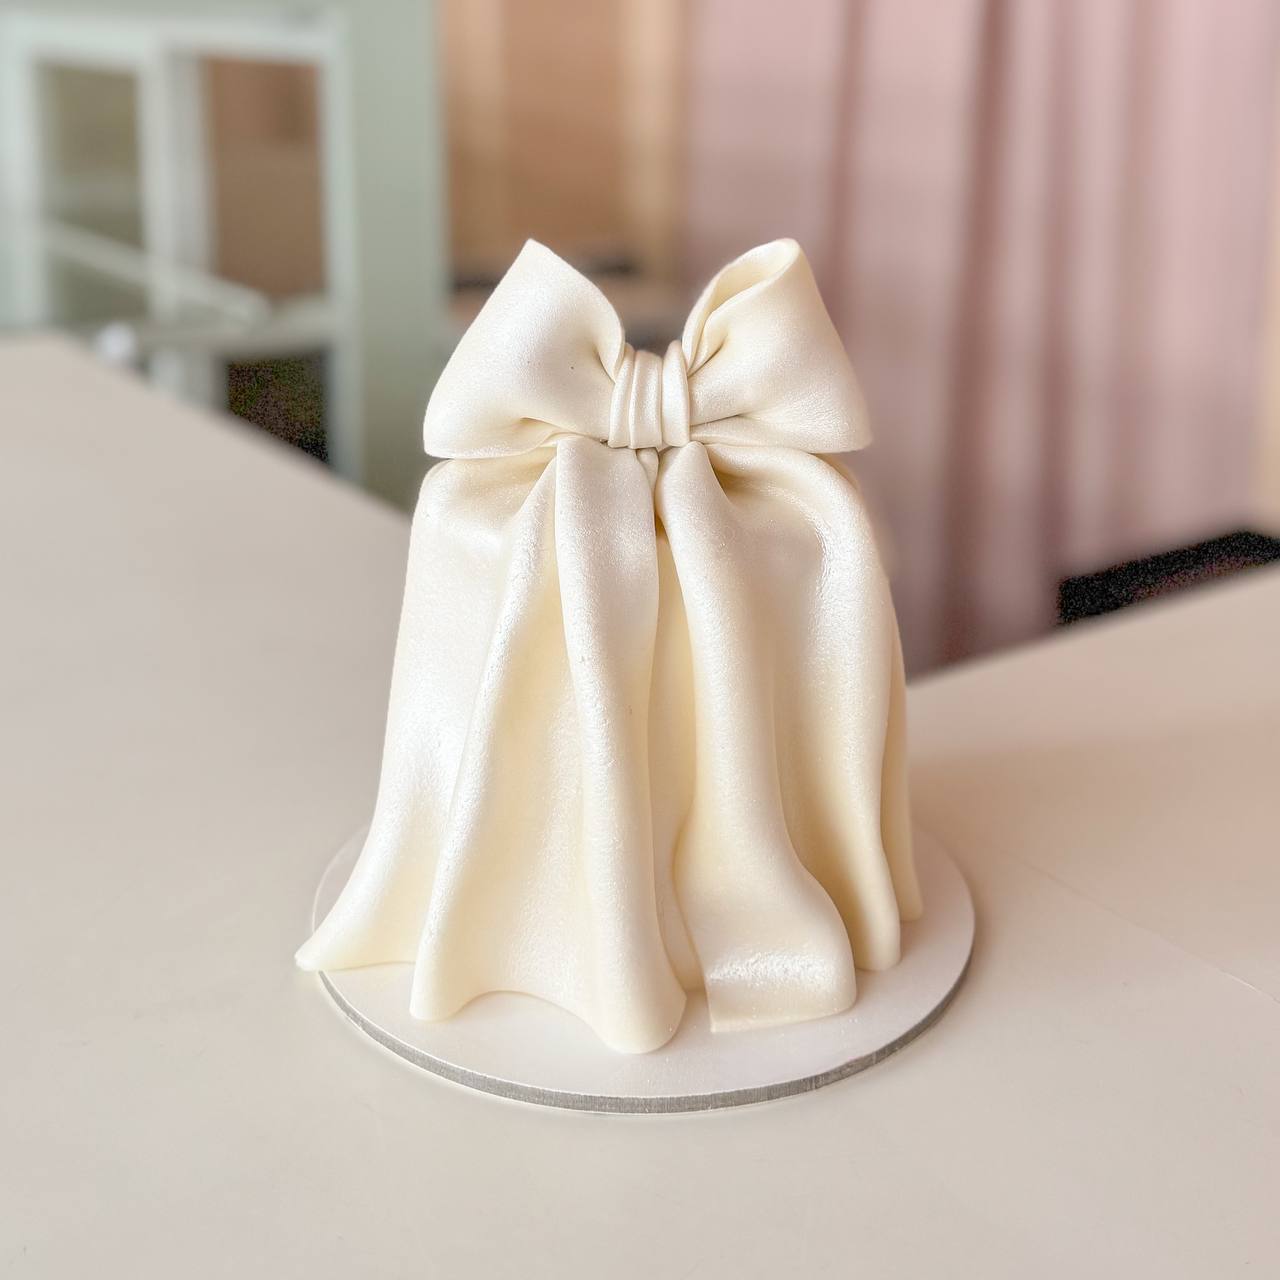 Silk and Pearls Wedding Cake – Union Cakes Manchester